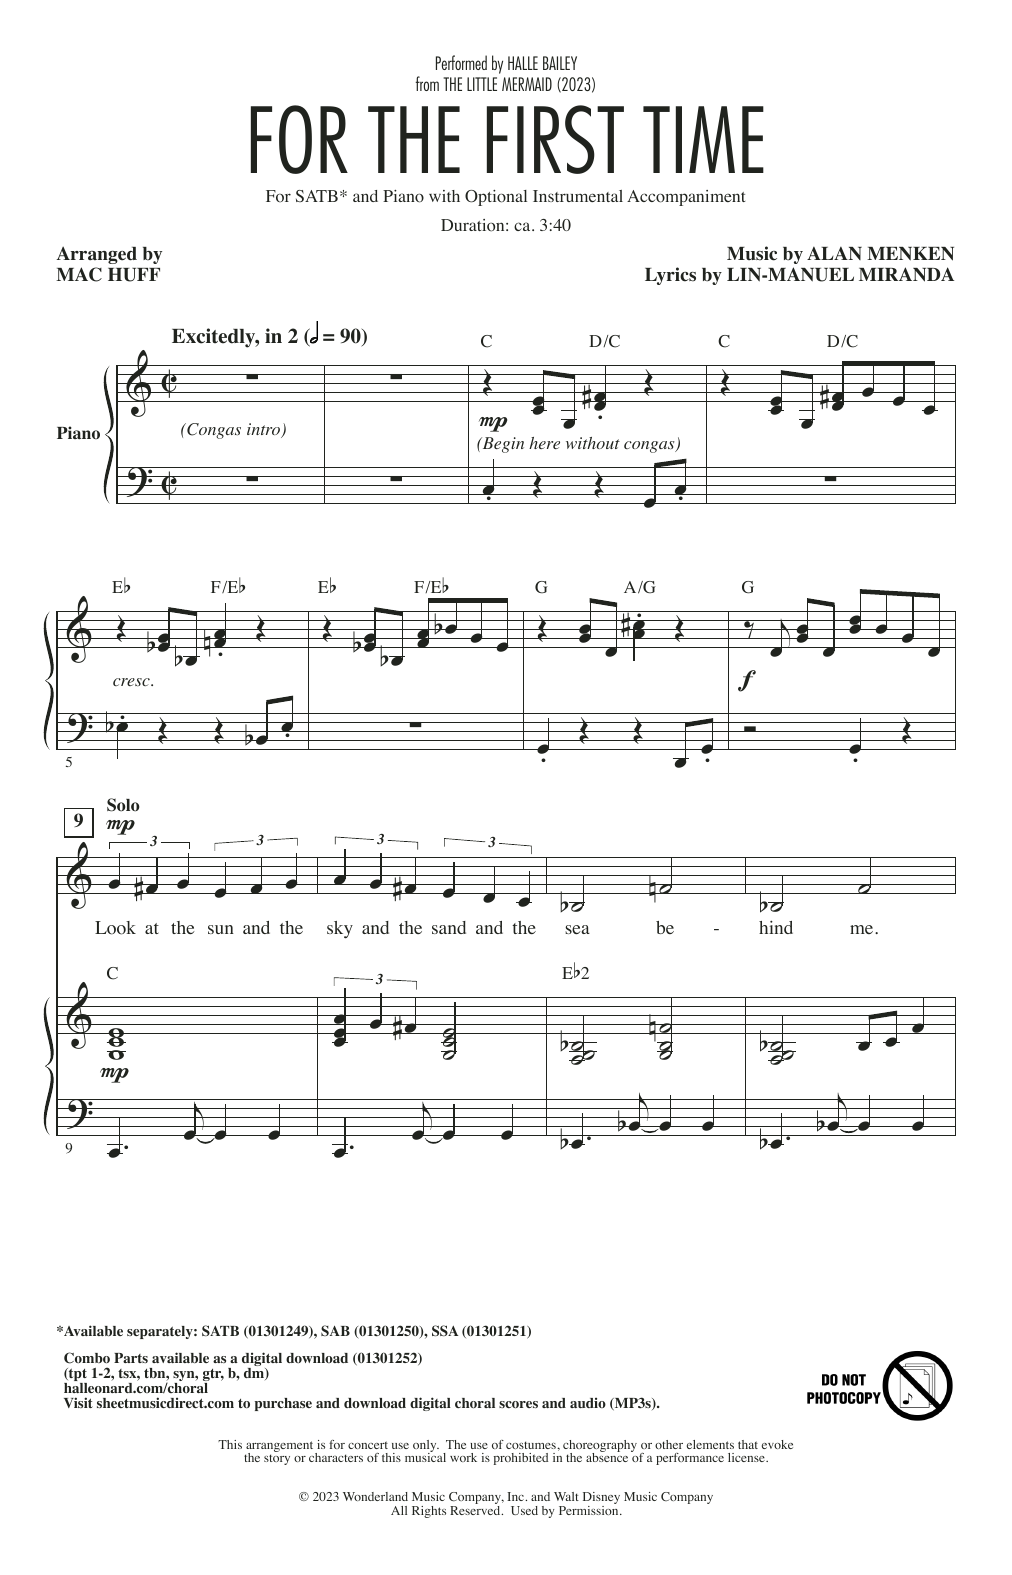 Halle Bailey For The First Time (from The Little Mermaid) (2023) (arr. Mac Huff) sheet music notes printable PDF score